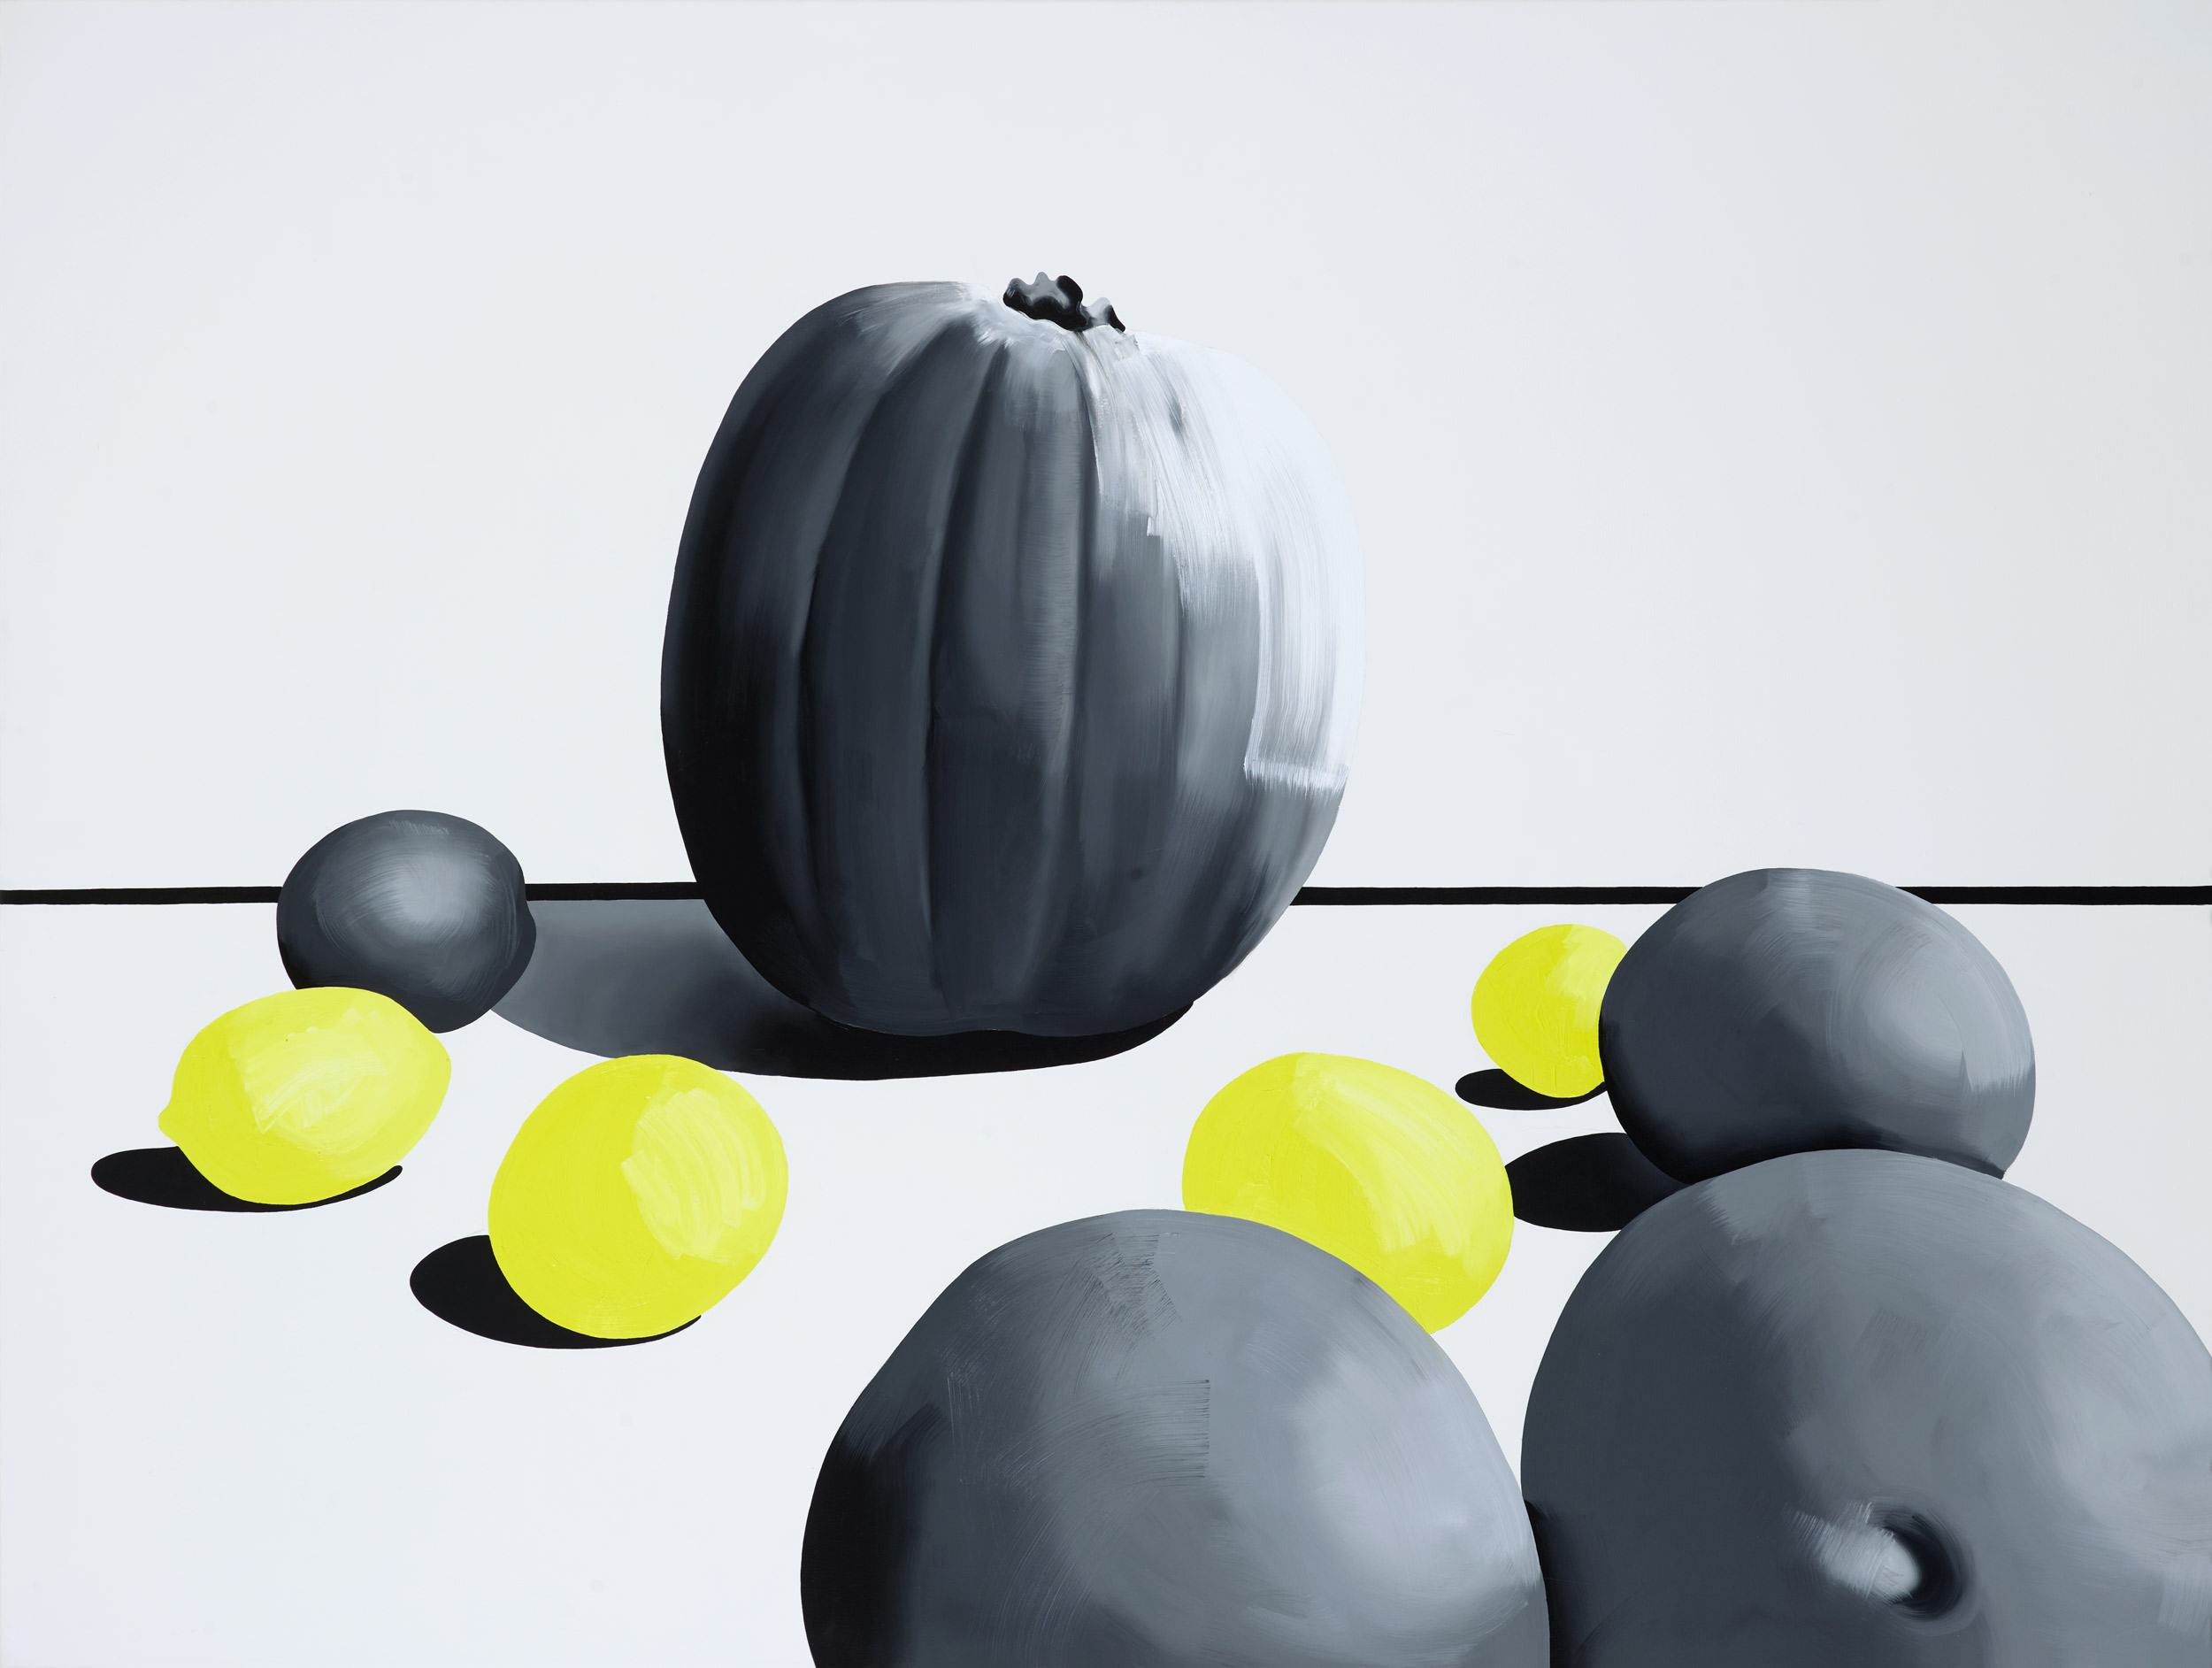 The Oranges Are Numerically Superior to the Pumpkin in the Painting